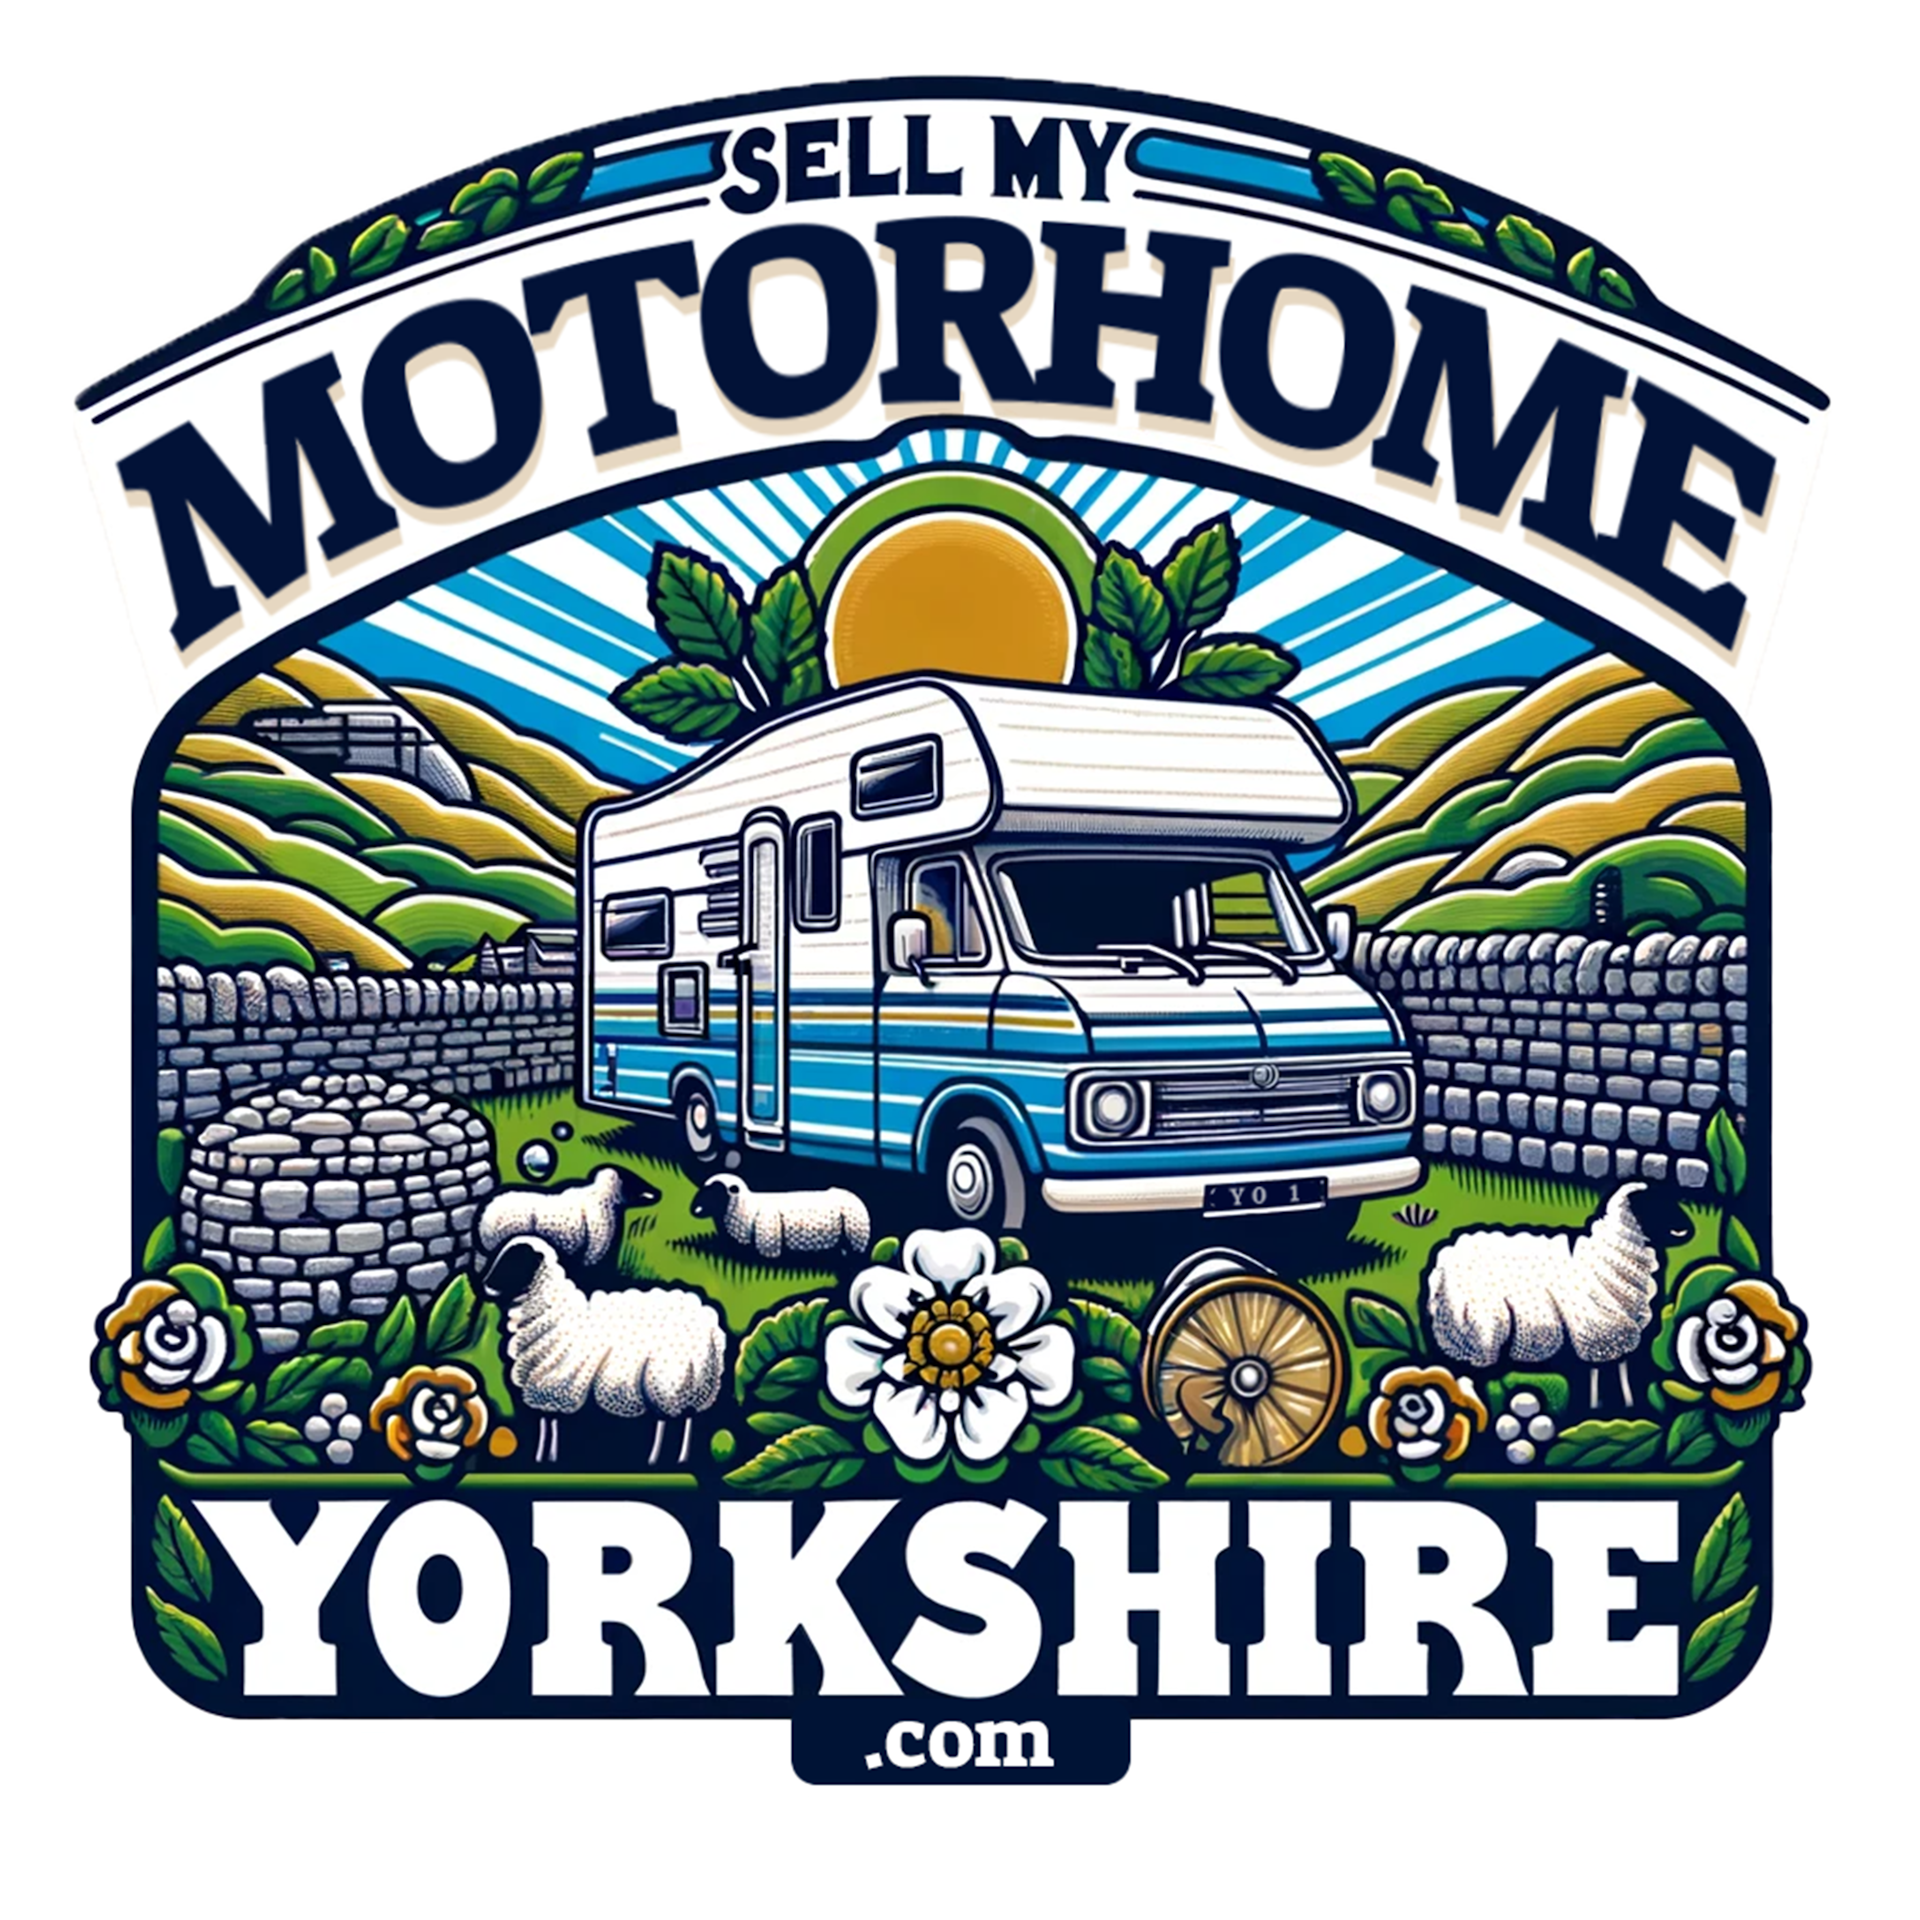 Logo for Sell My Motorhome Yorkshire based in Halifax Featuring a Blue RV, white sheep, green hills, sunrise, with text.